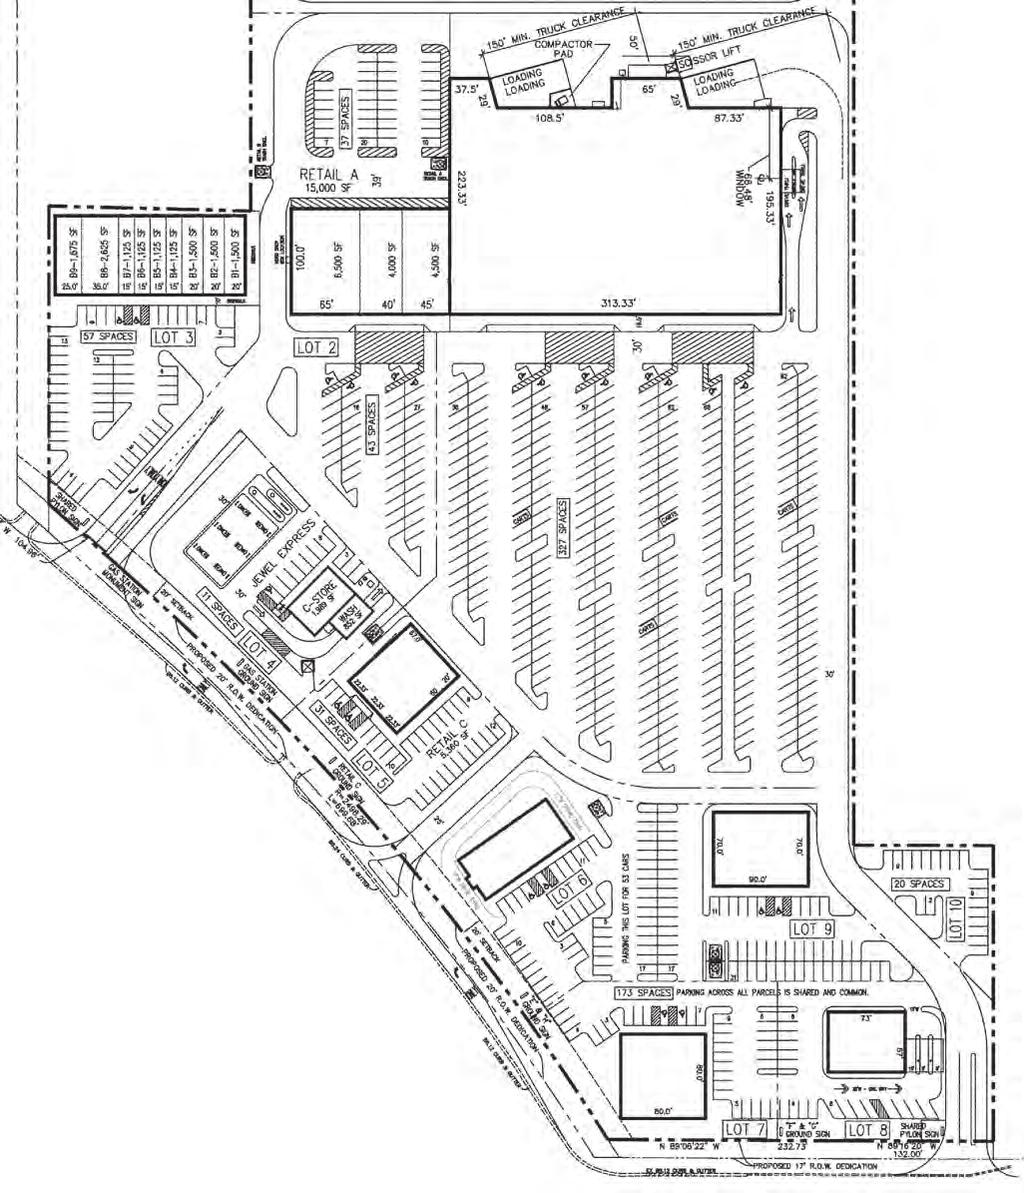 SITE PLAN NAILCESSITY 1-HOUR